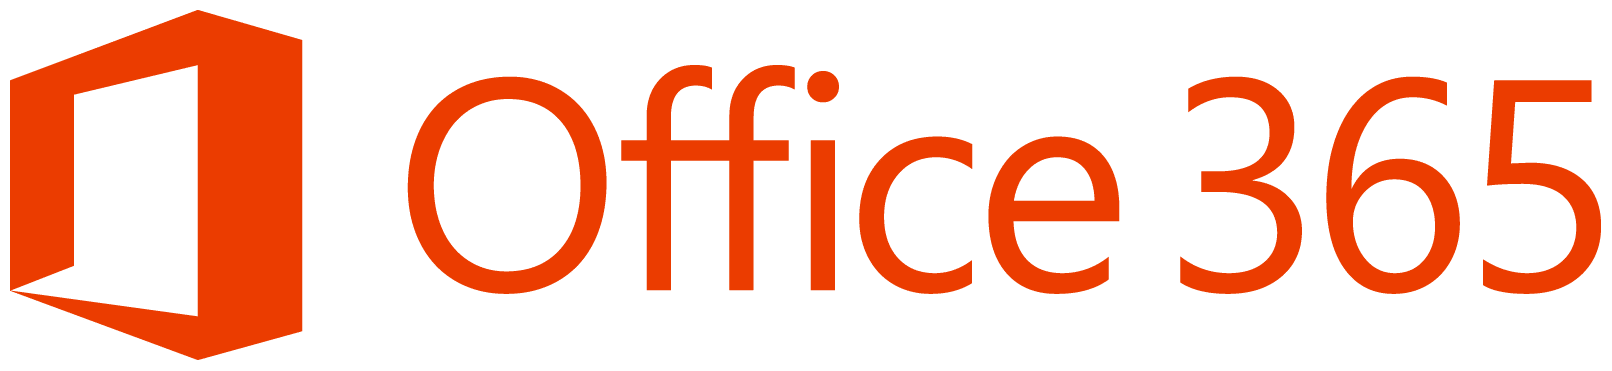 The image features the logo of Office 365, which consists of an orange icon resembling an open, three-dimensional box and the words "Office 365" in orange text.